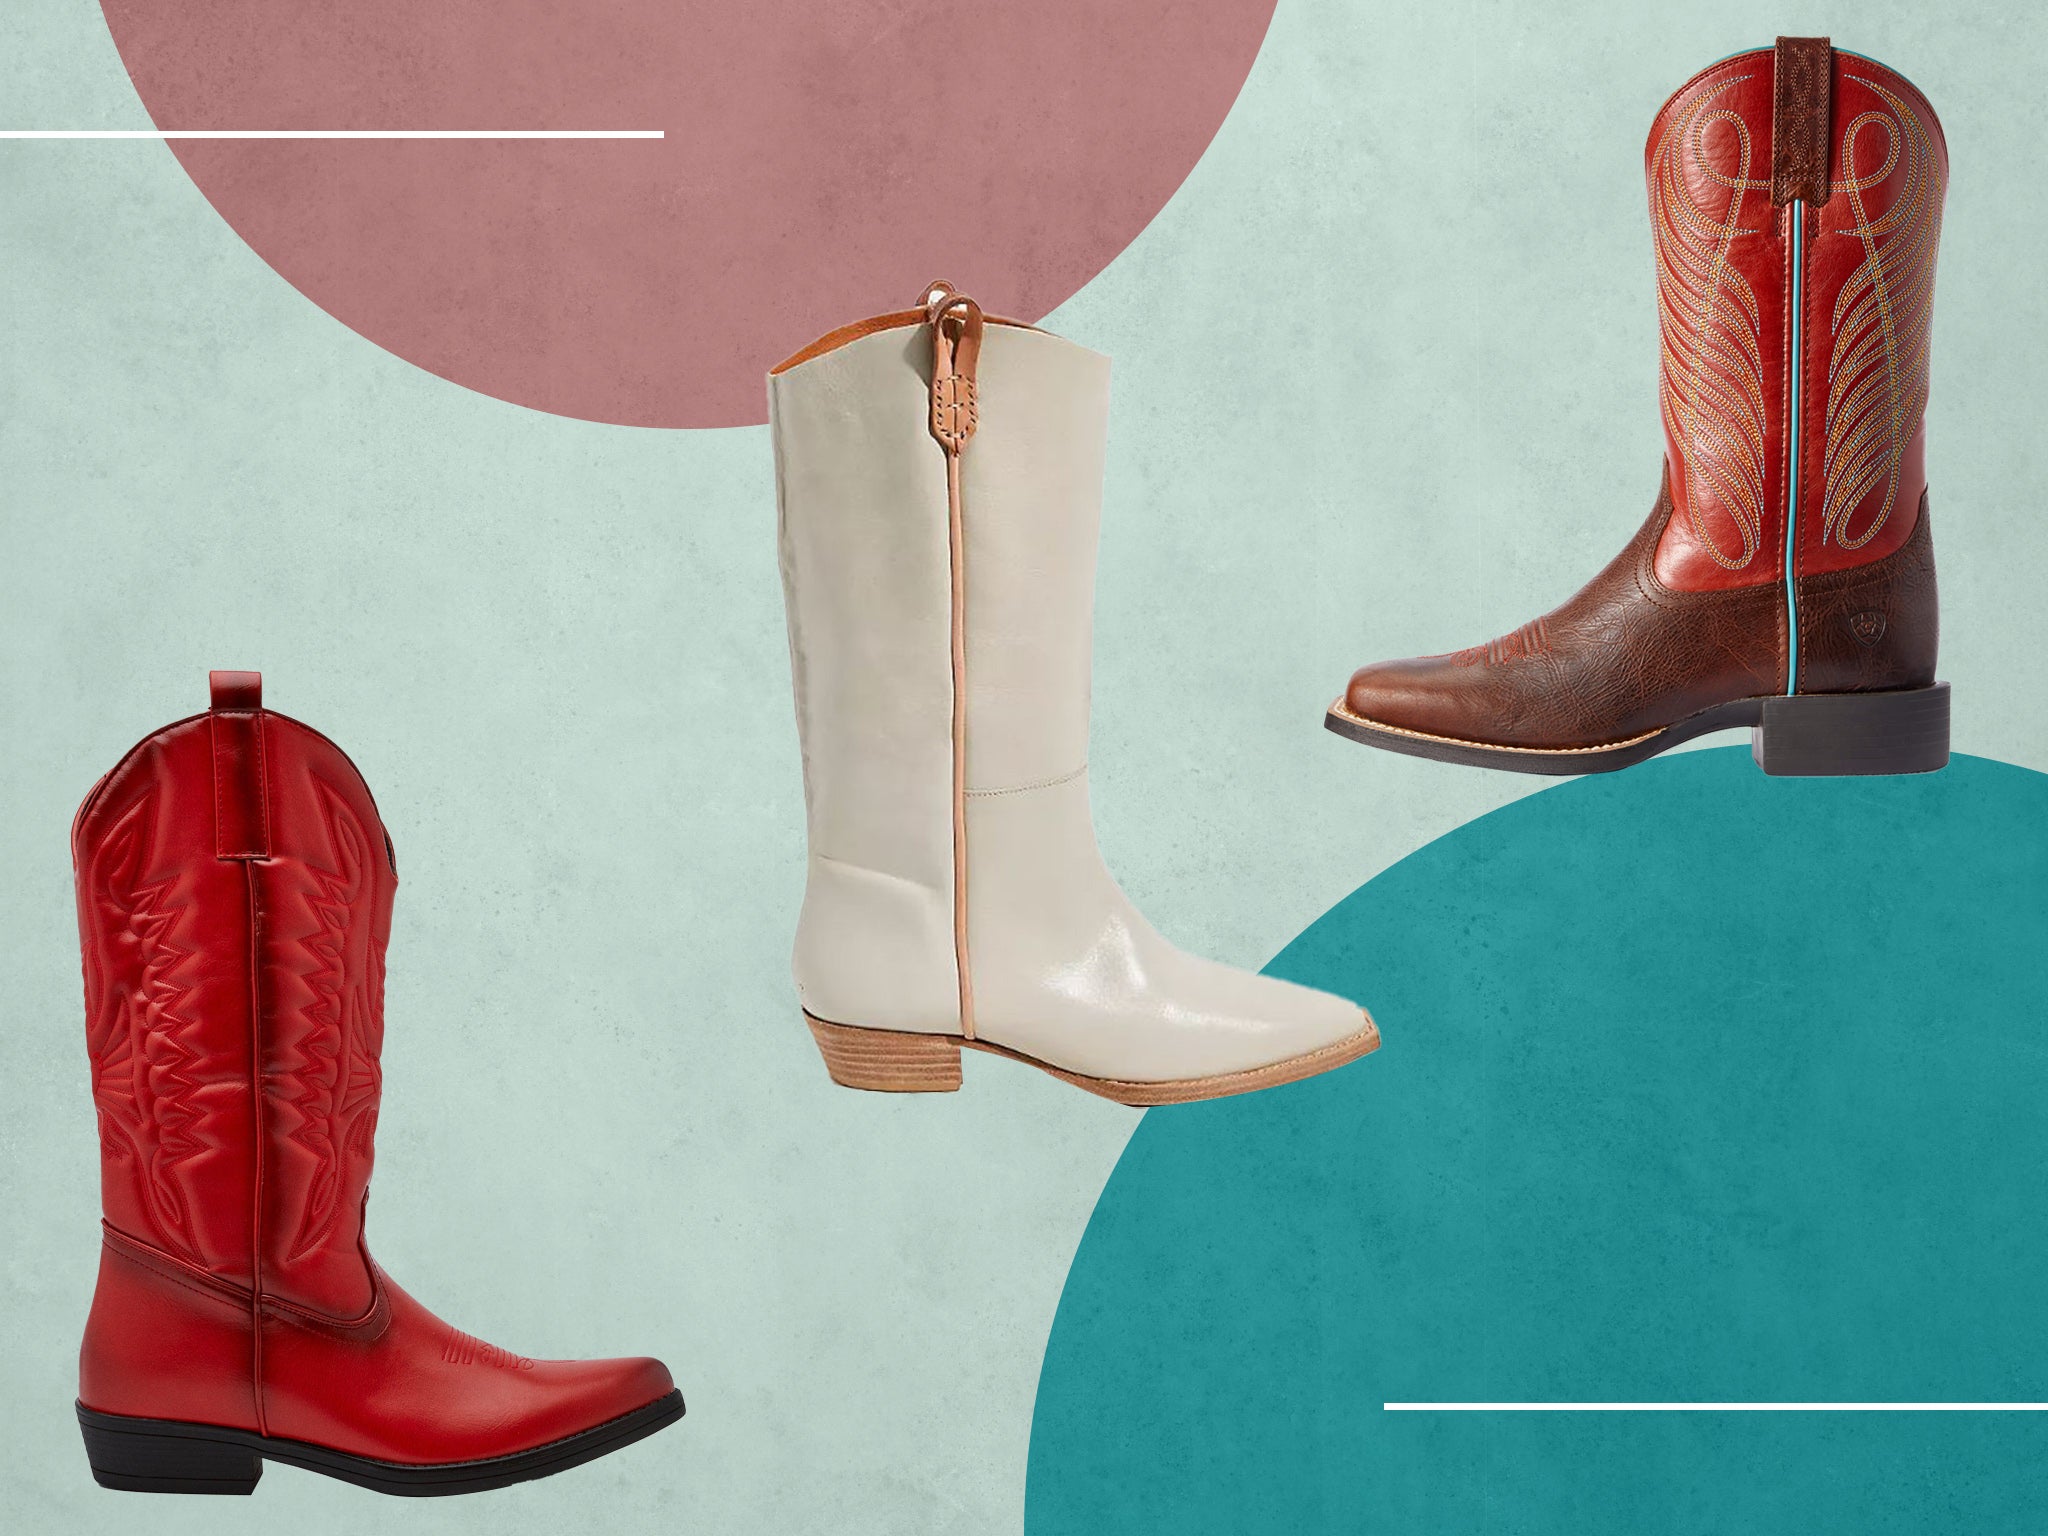 Yeehaw! These are the styles to make a statement in